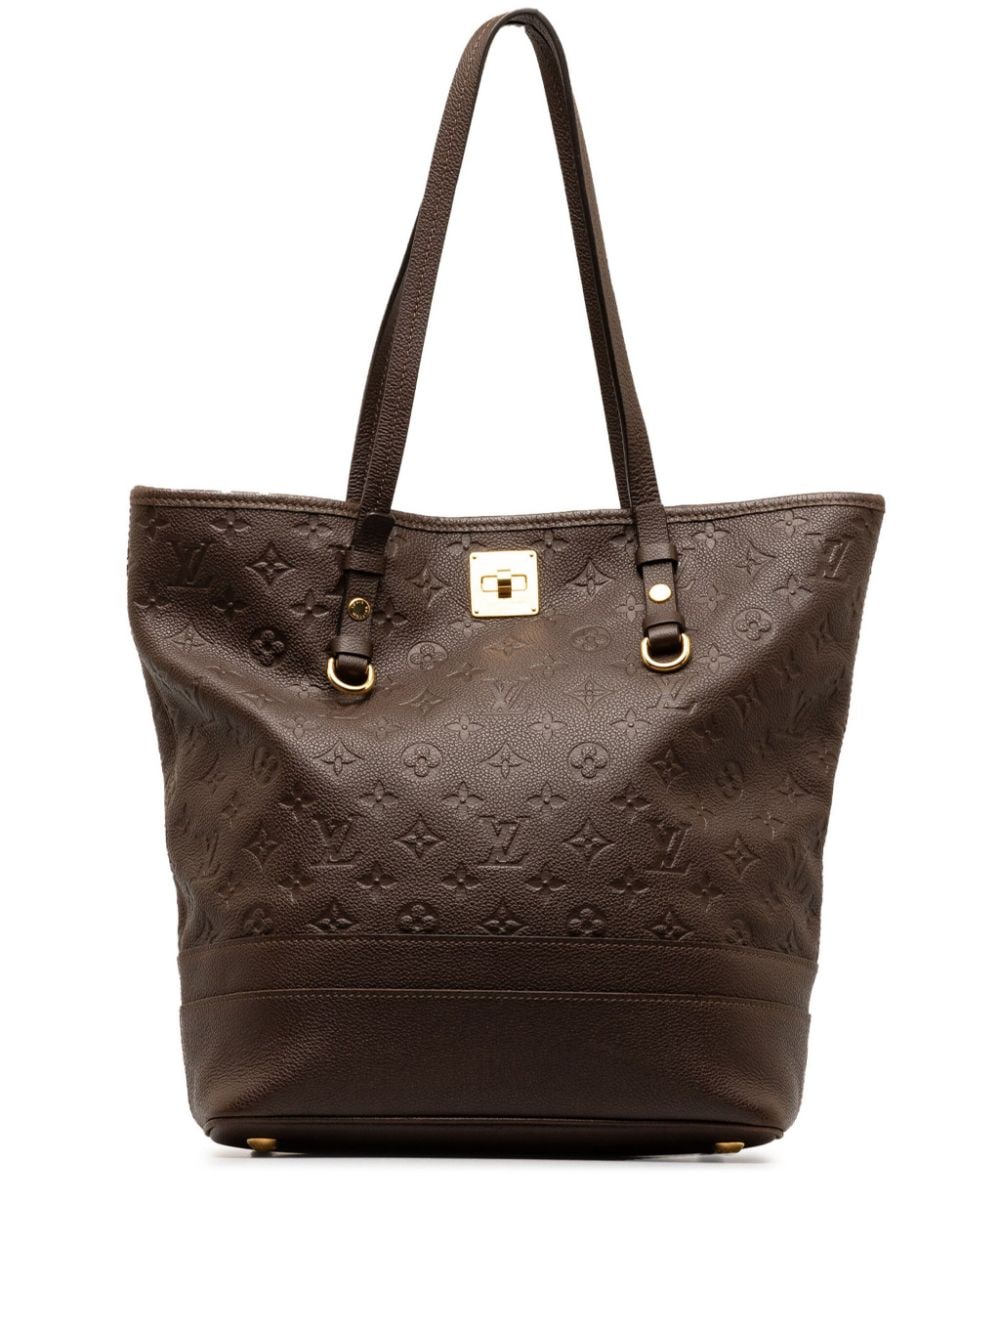 Pre-owned Louis Vuitton 2012 Citadine Pm Tote Bag In Brown